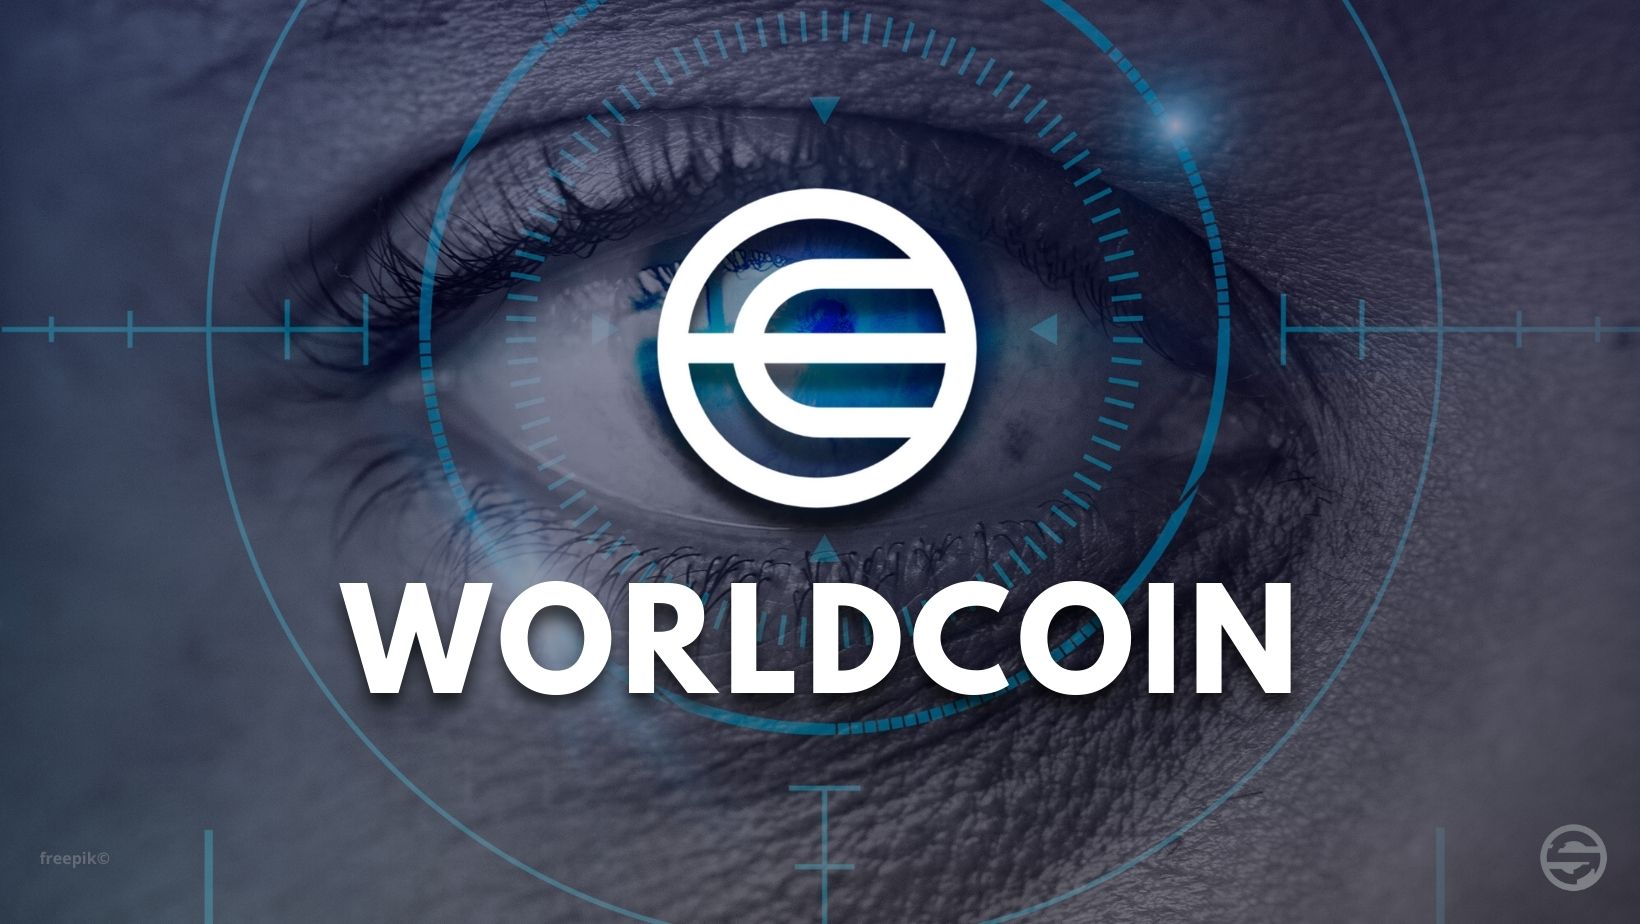 WorldCoin: monetary revolution or threat to privacy?